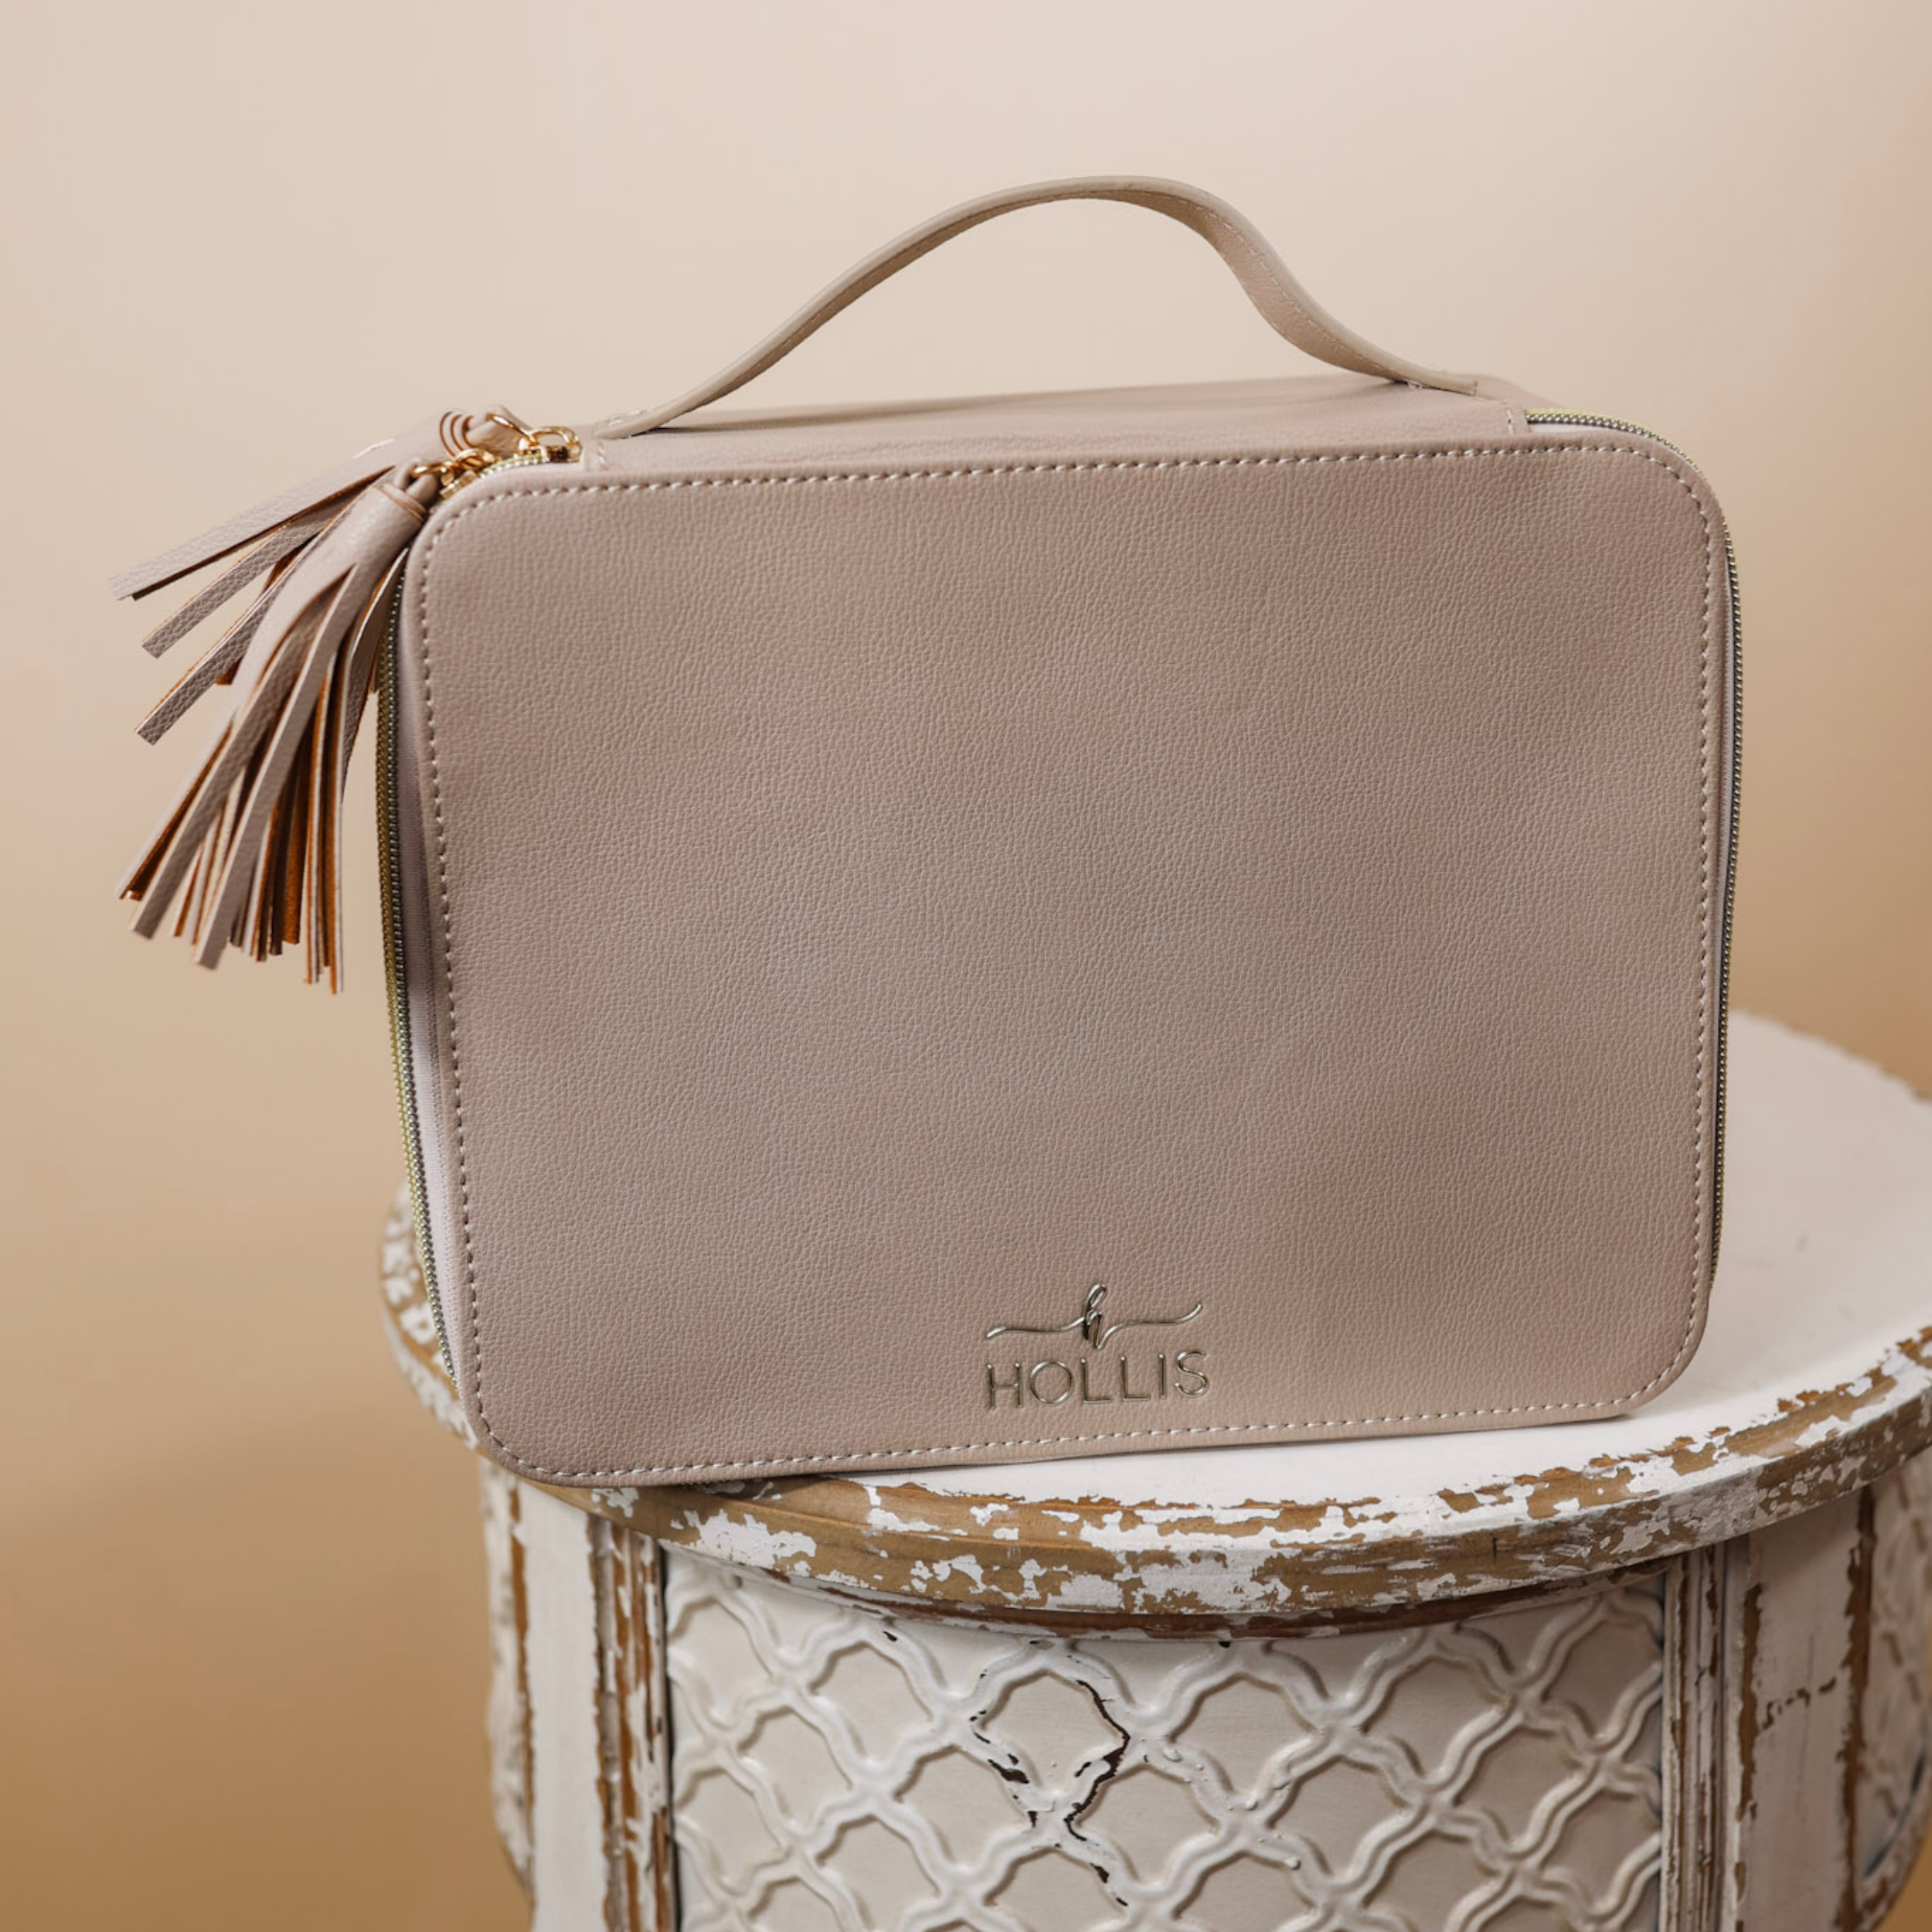 A nude bag with a handle and tassel is sitting in the middle of the picture. Background is solid tan.